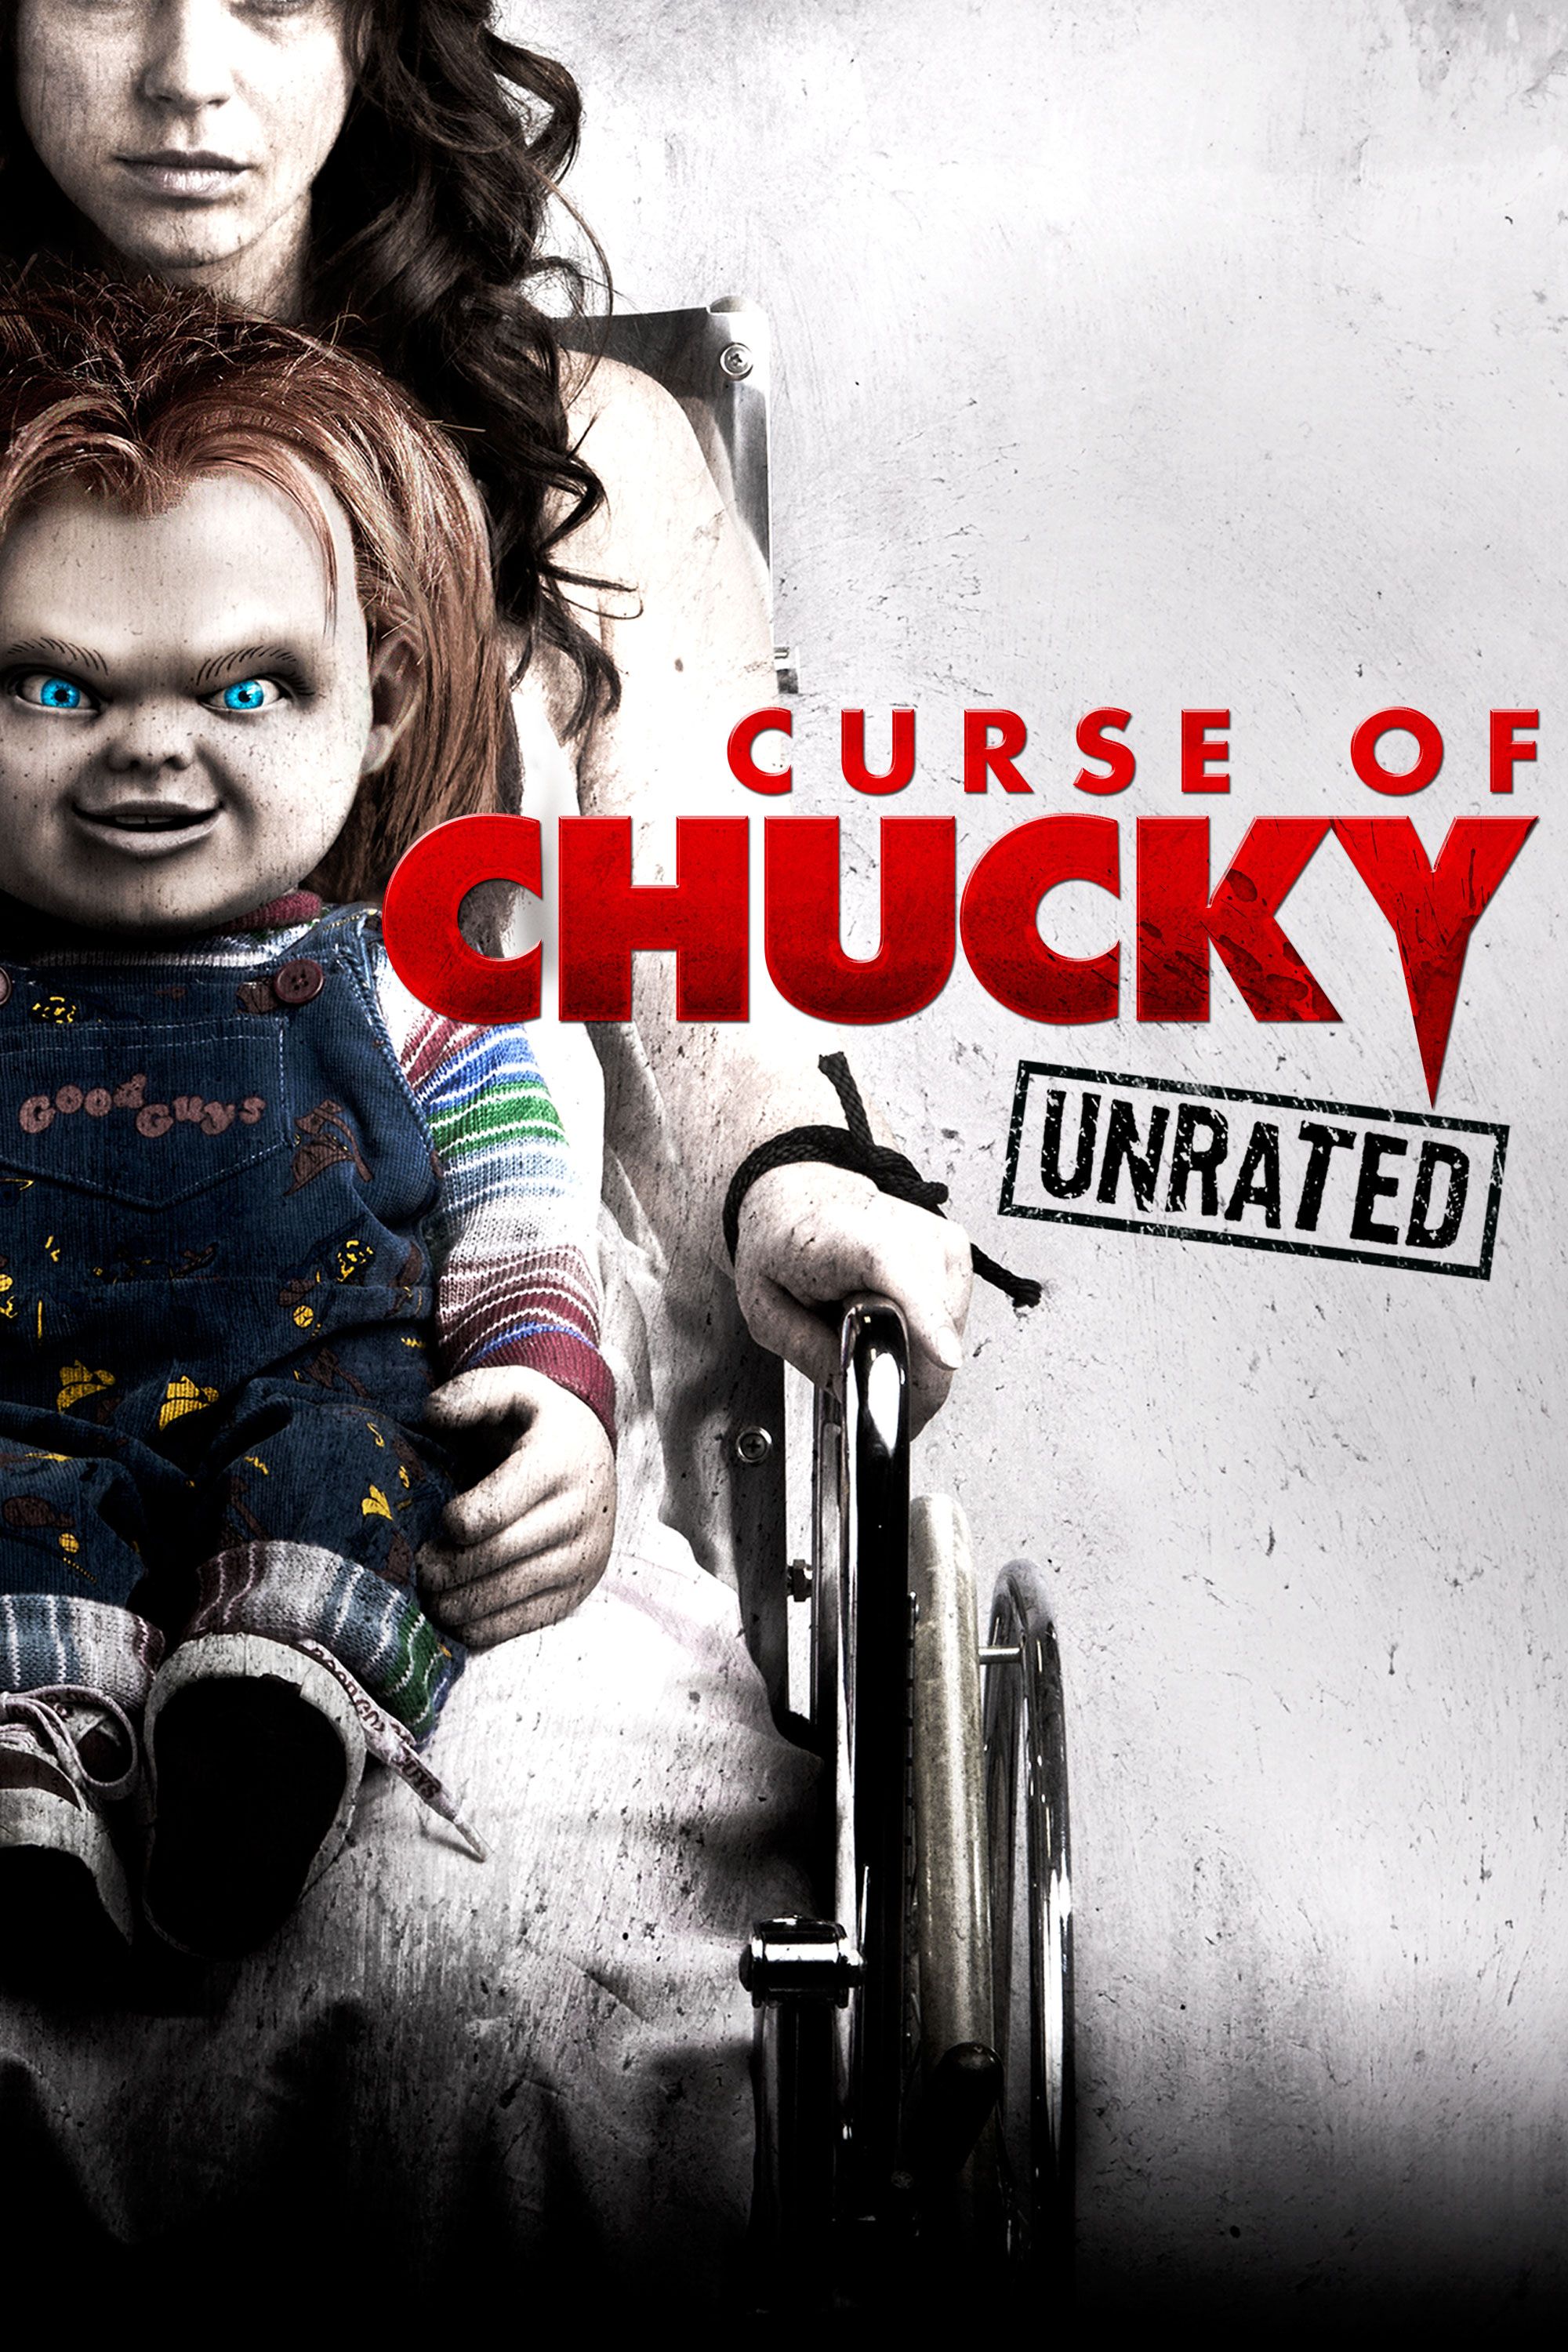 brian spors recommends chucky full movie download pic